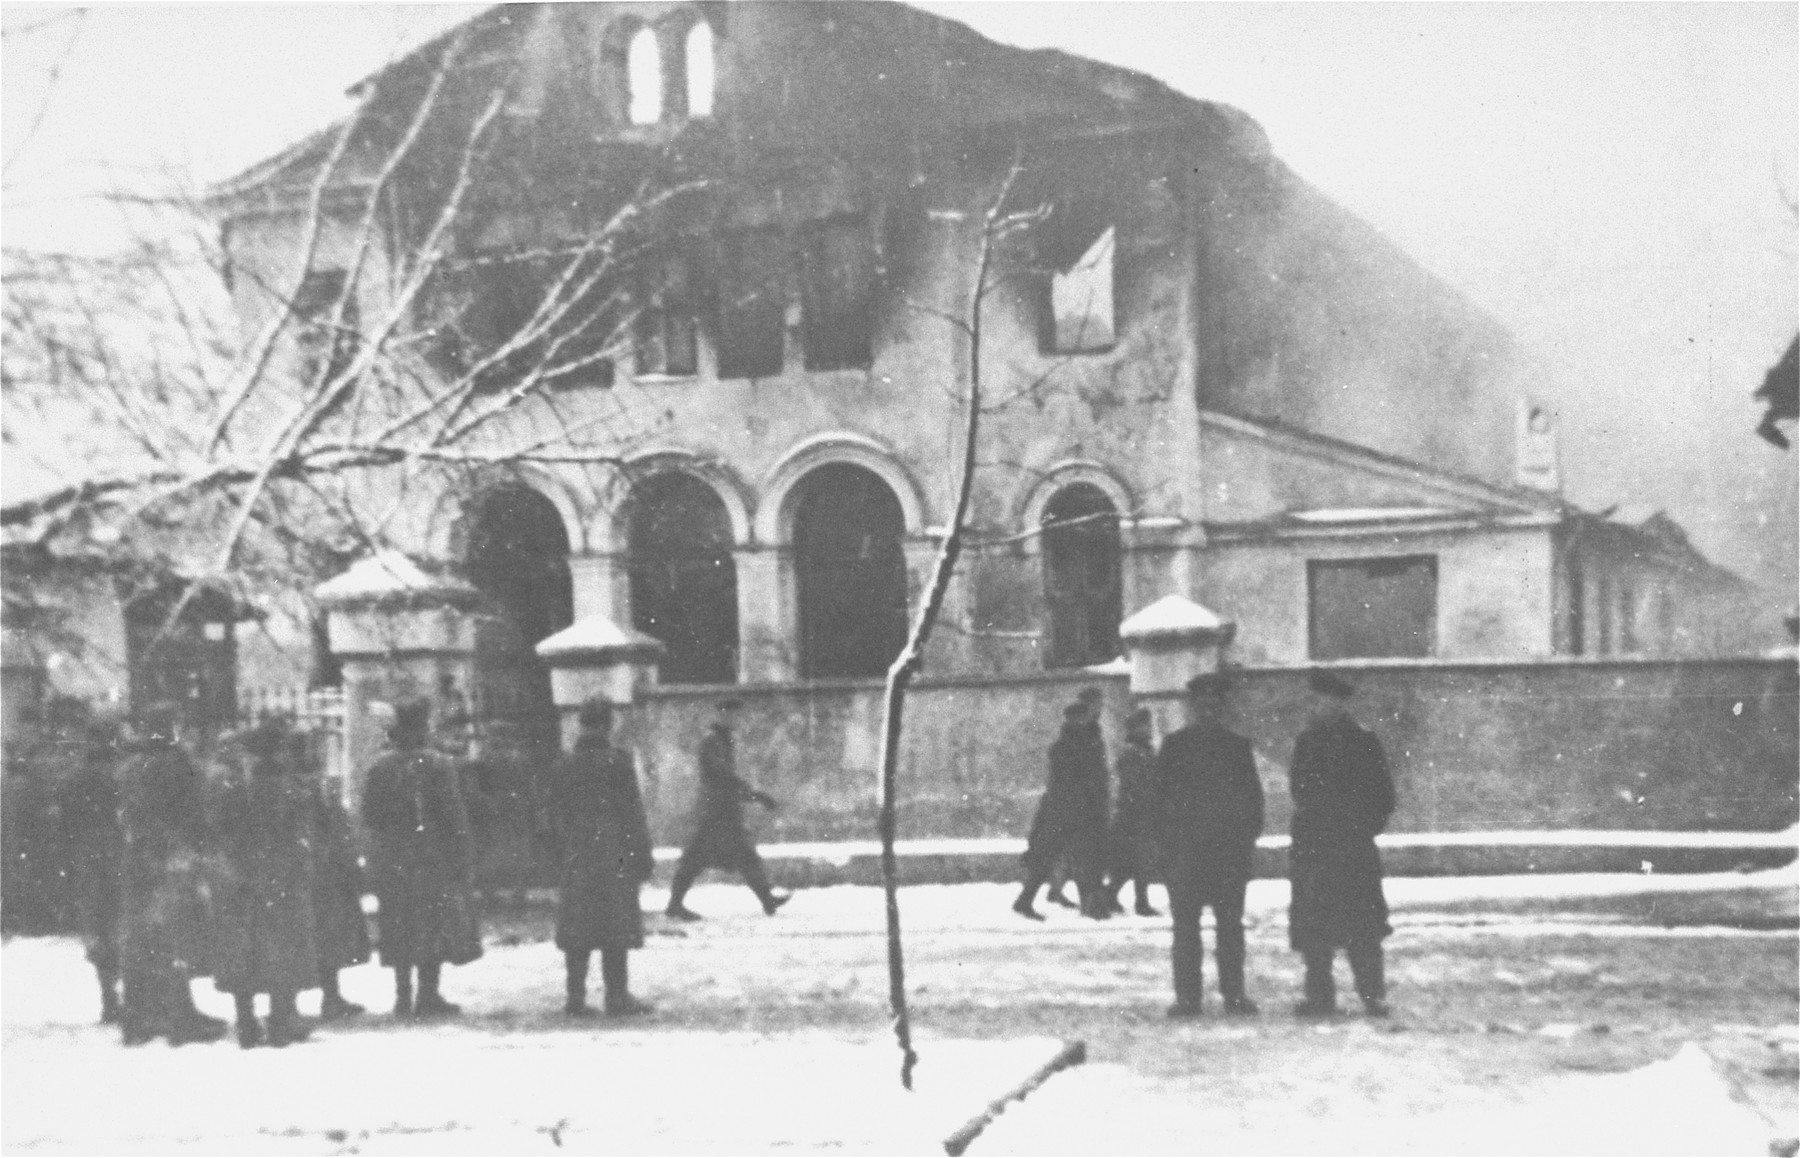 German soldiers view the burning of a synagogue in Siedlce.